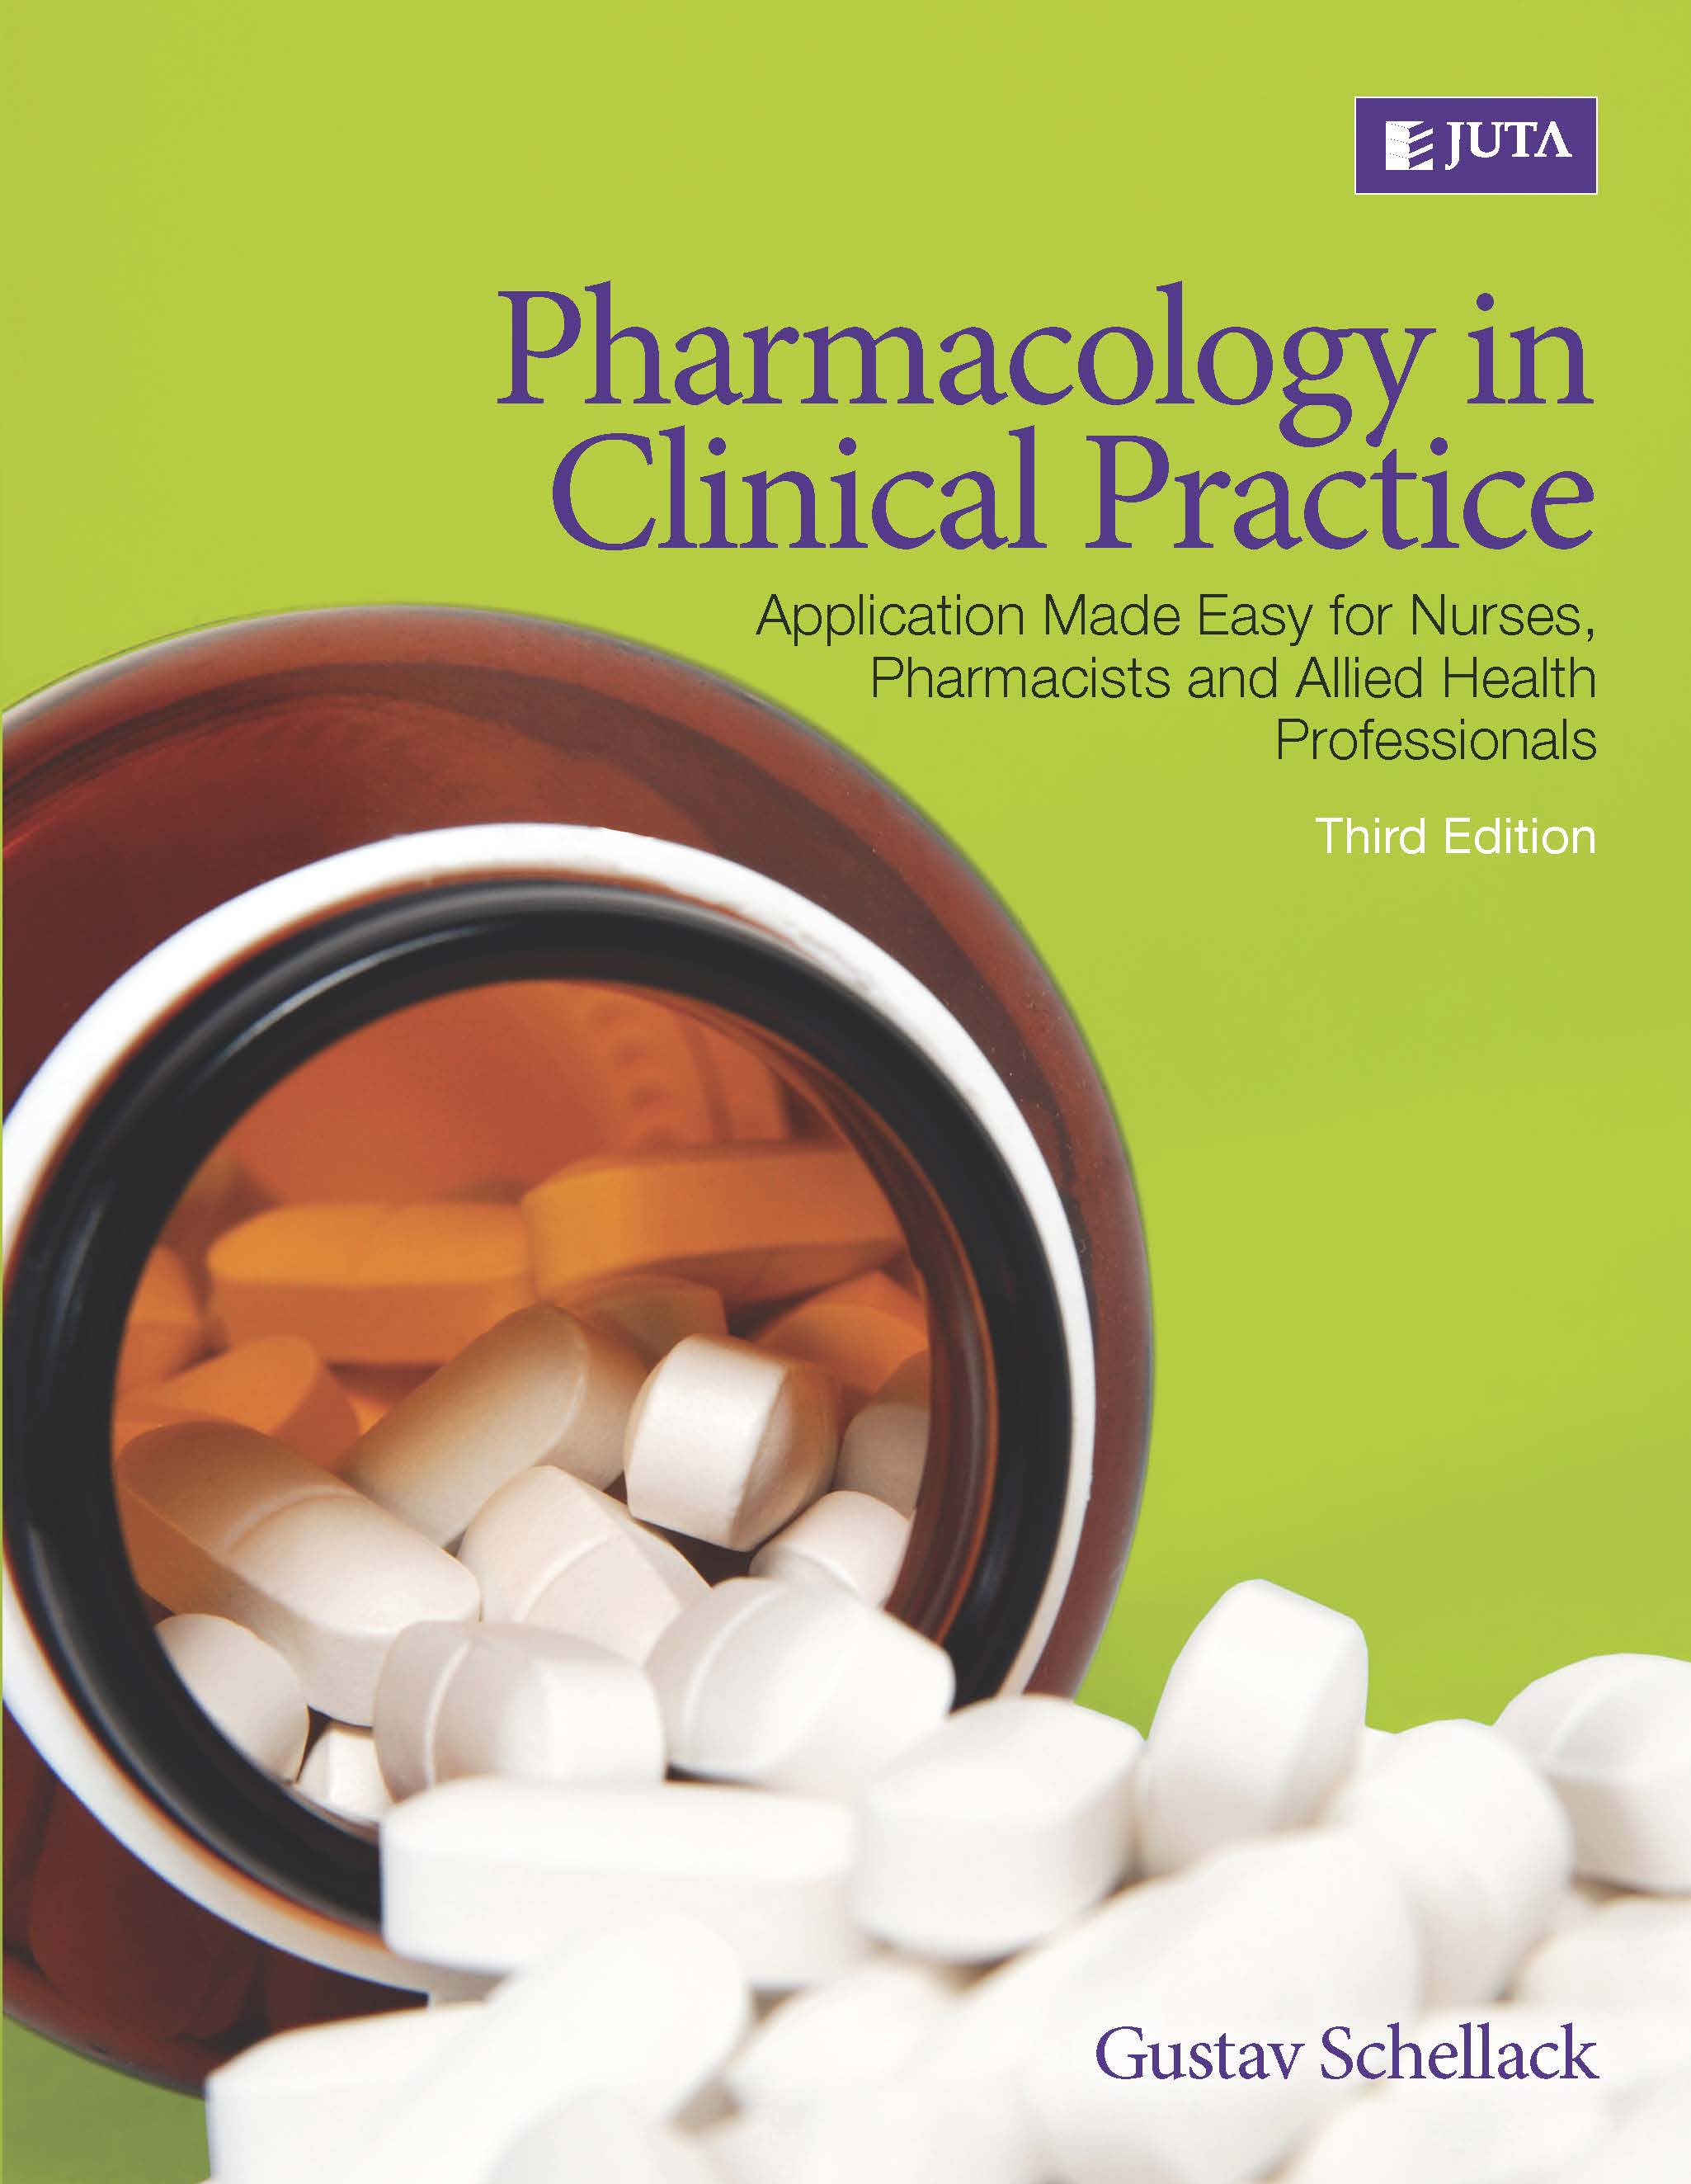 Pharmacology in Clinical Practice: Application Made Easy for Nurses, Pharmacists and Allied Health Professionals